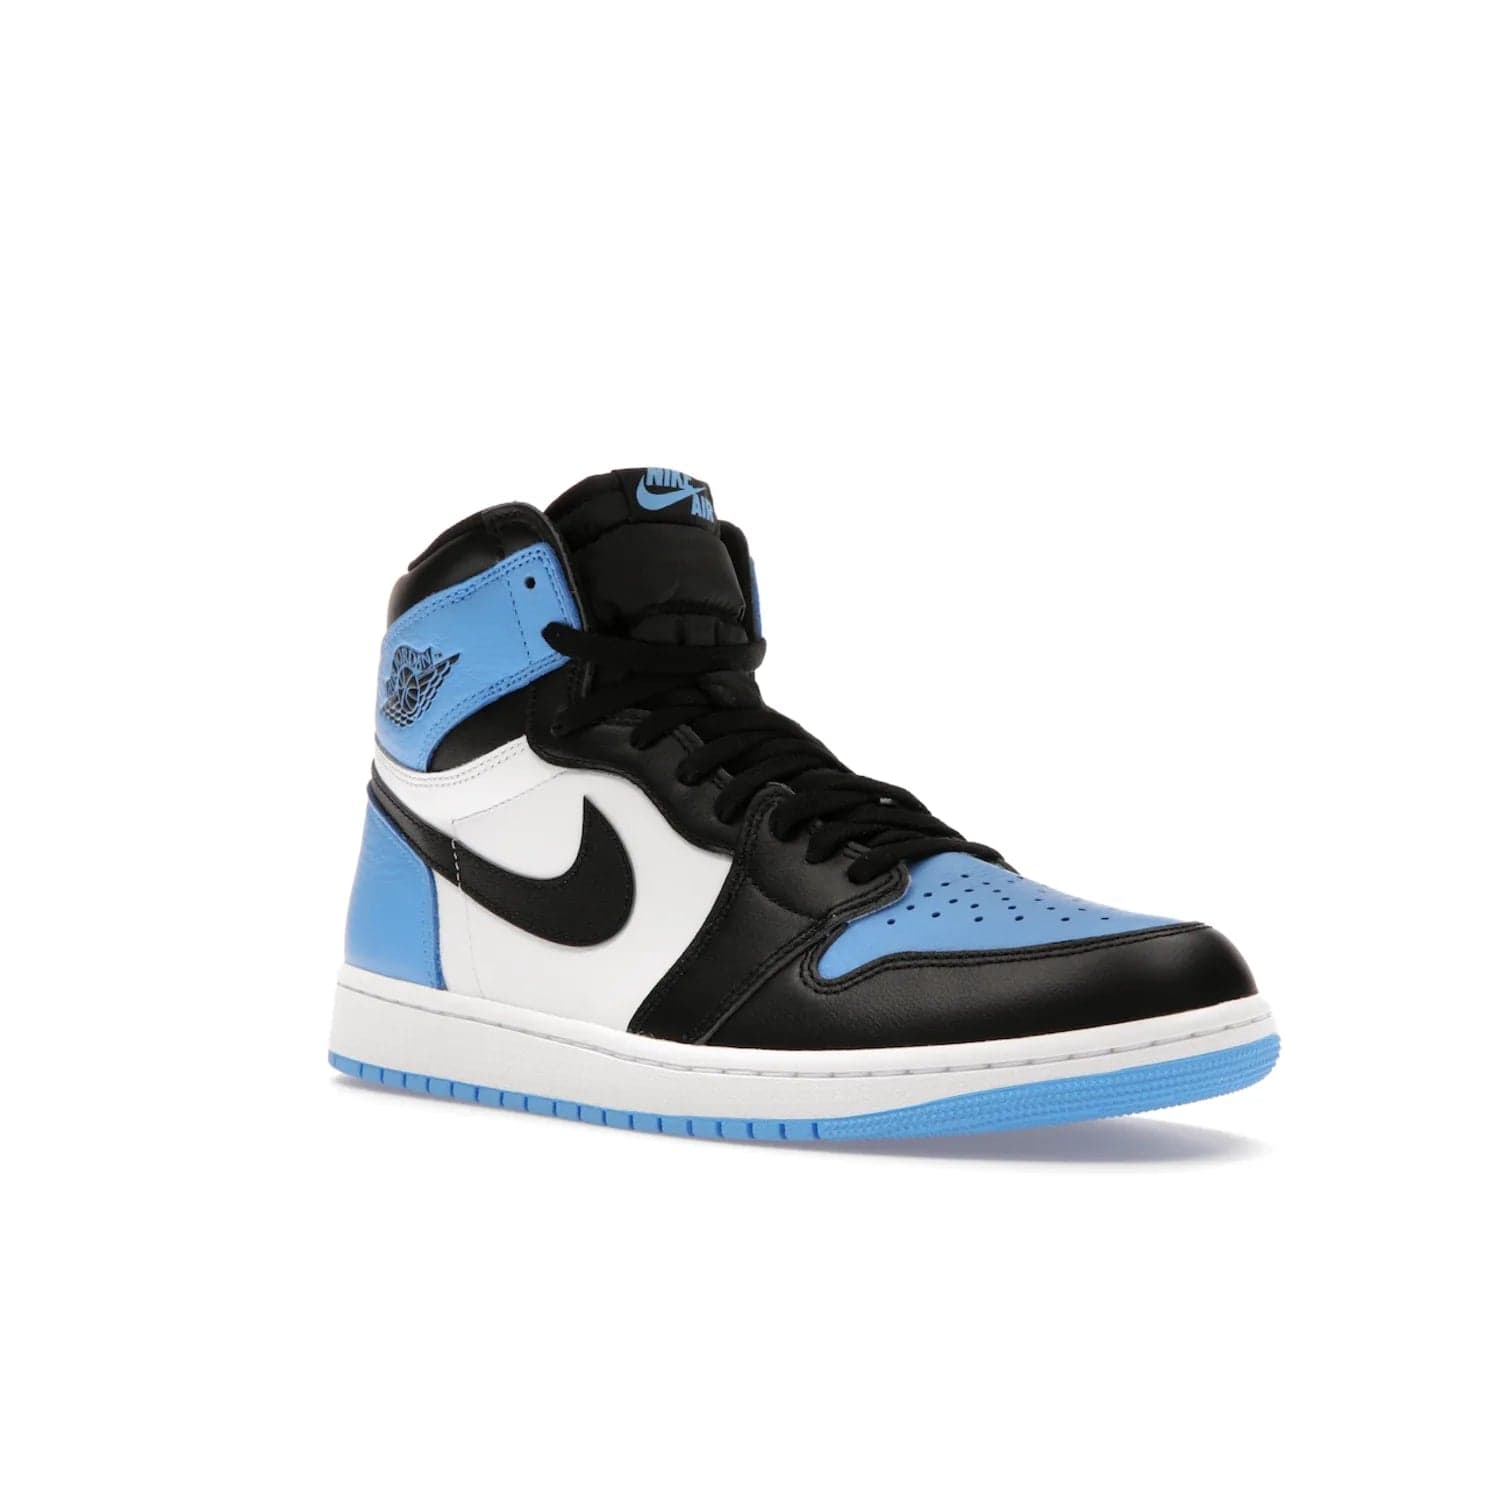 Jordan 1 Retro High OG UNC Toe - Image 5 - Only at www.BallersClubKickz.com - Jordan 1 High OG UNC Toe is a fashionable, high-quality sneaker featuring University Blue, Black White and White. Releasing July 22, 2023, it's the perfect pick up for sneakerheads.